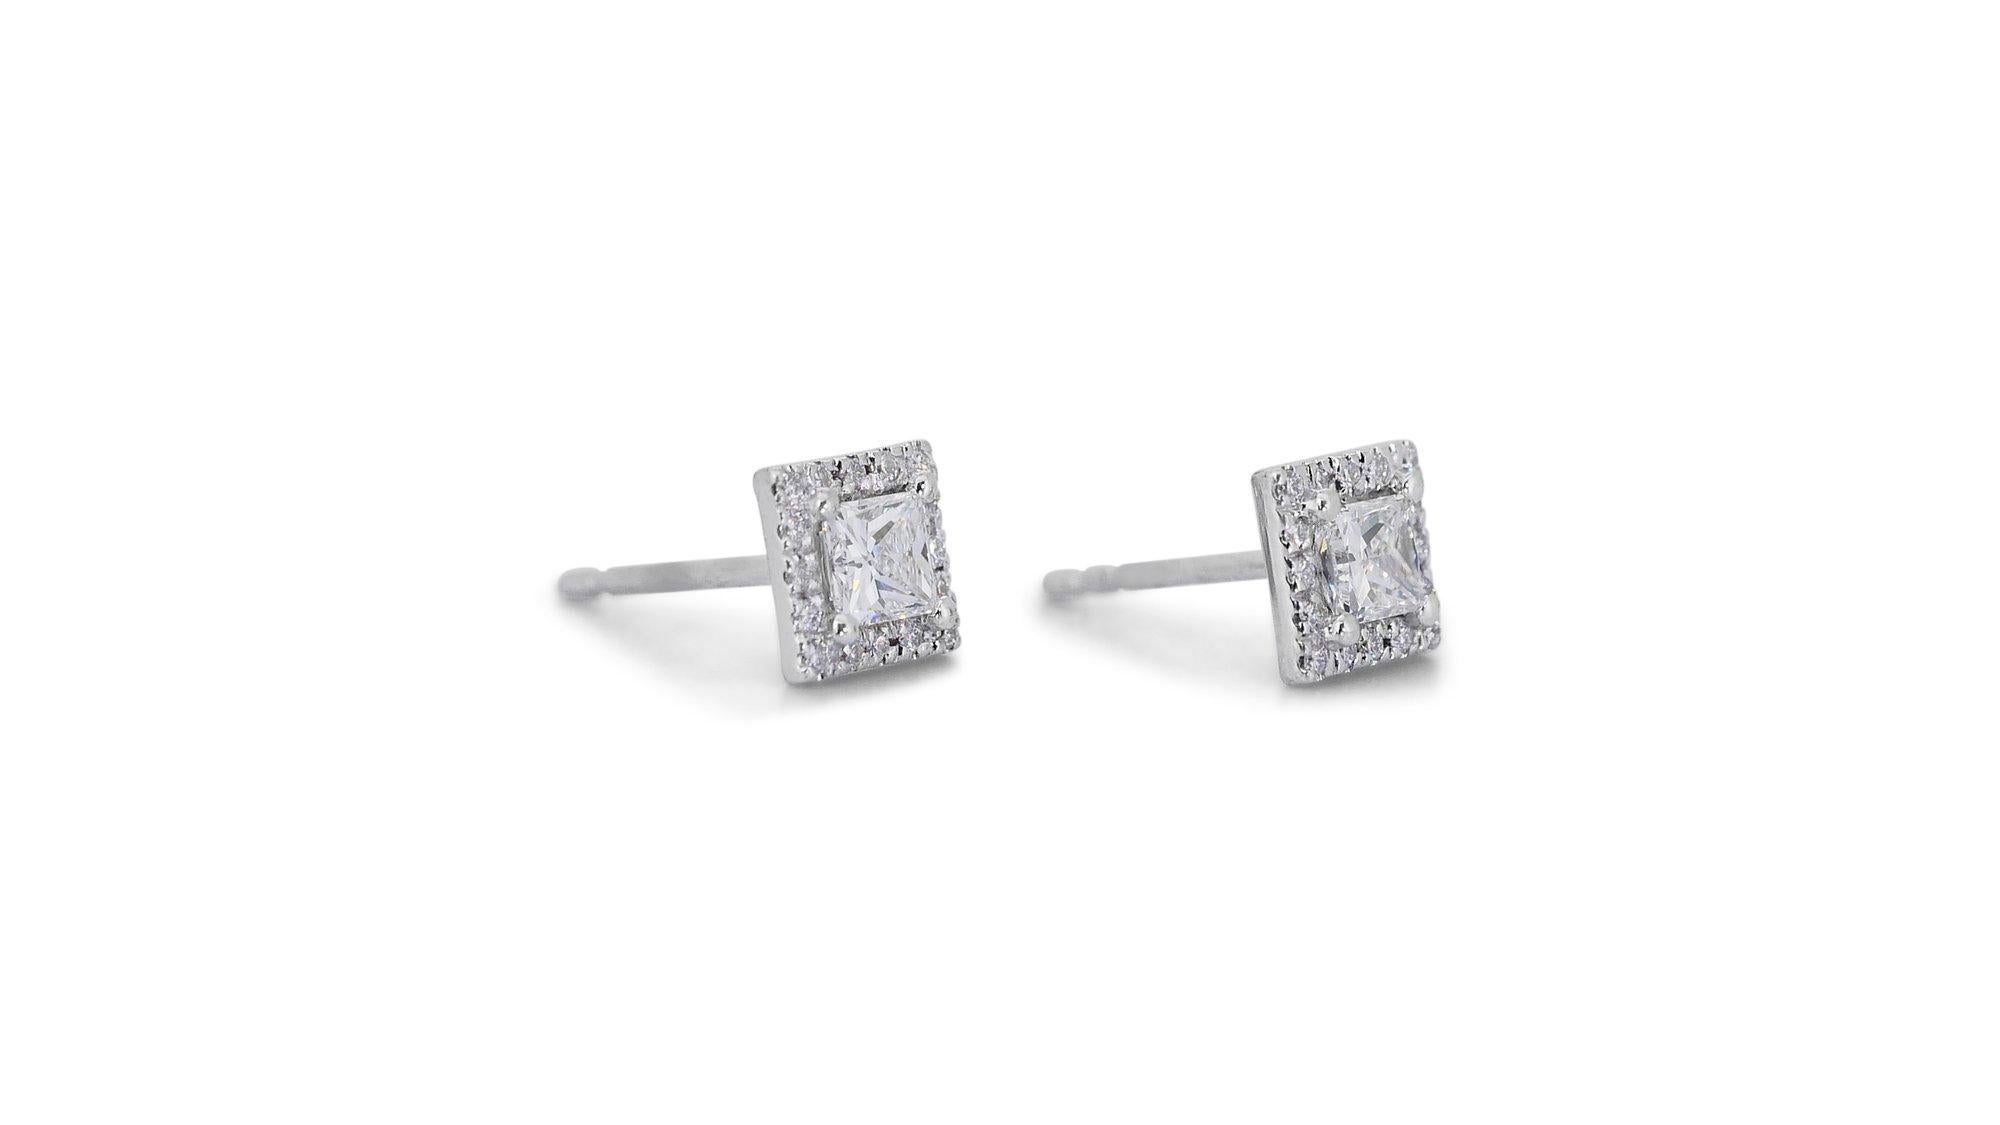 Stunning 2.37ct Diamond Stud Earrings in 18k White Gold - GIA Certified

Experience the luxury of these dazzling diamond stud earrings, crafted from 18k white gold for a timeless, elegant style. The main stones are two square diamonds with